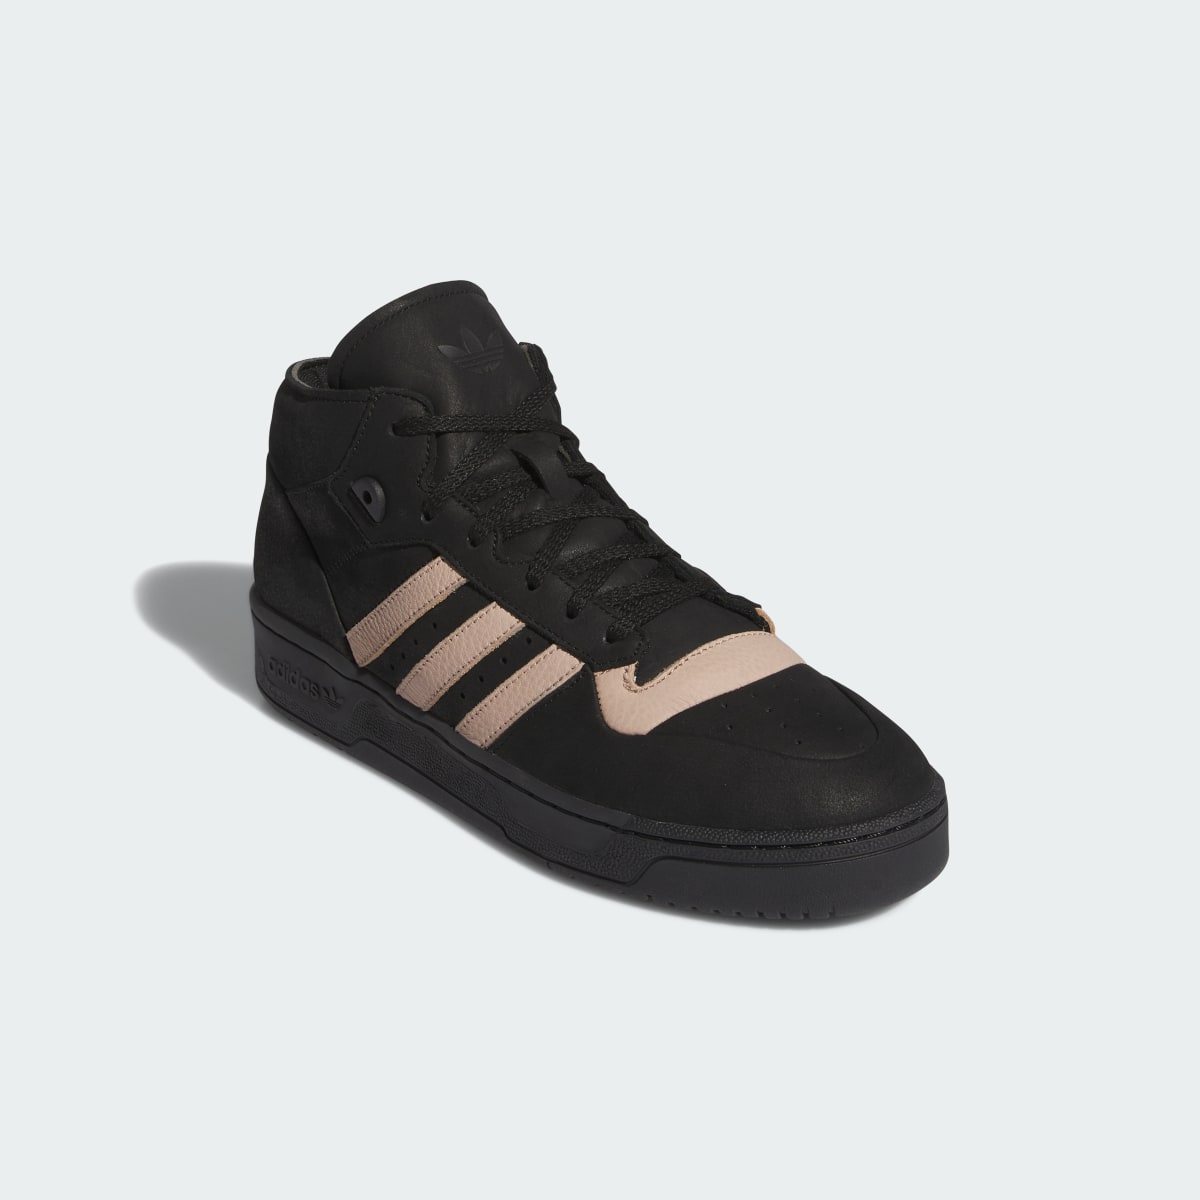 Adidas Rivalry Mid 001 Shoes. 5